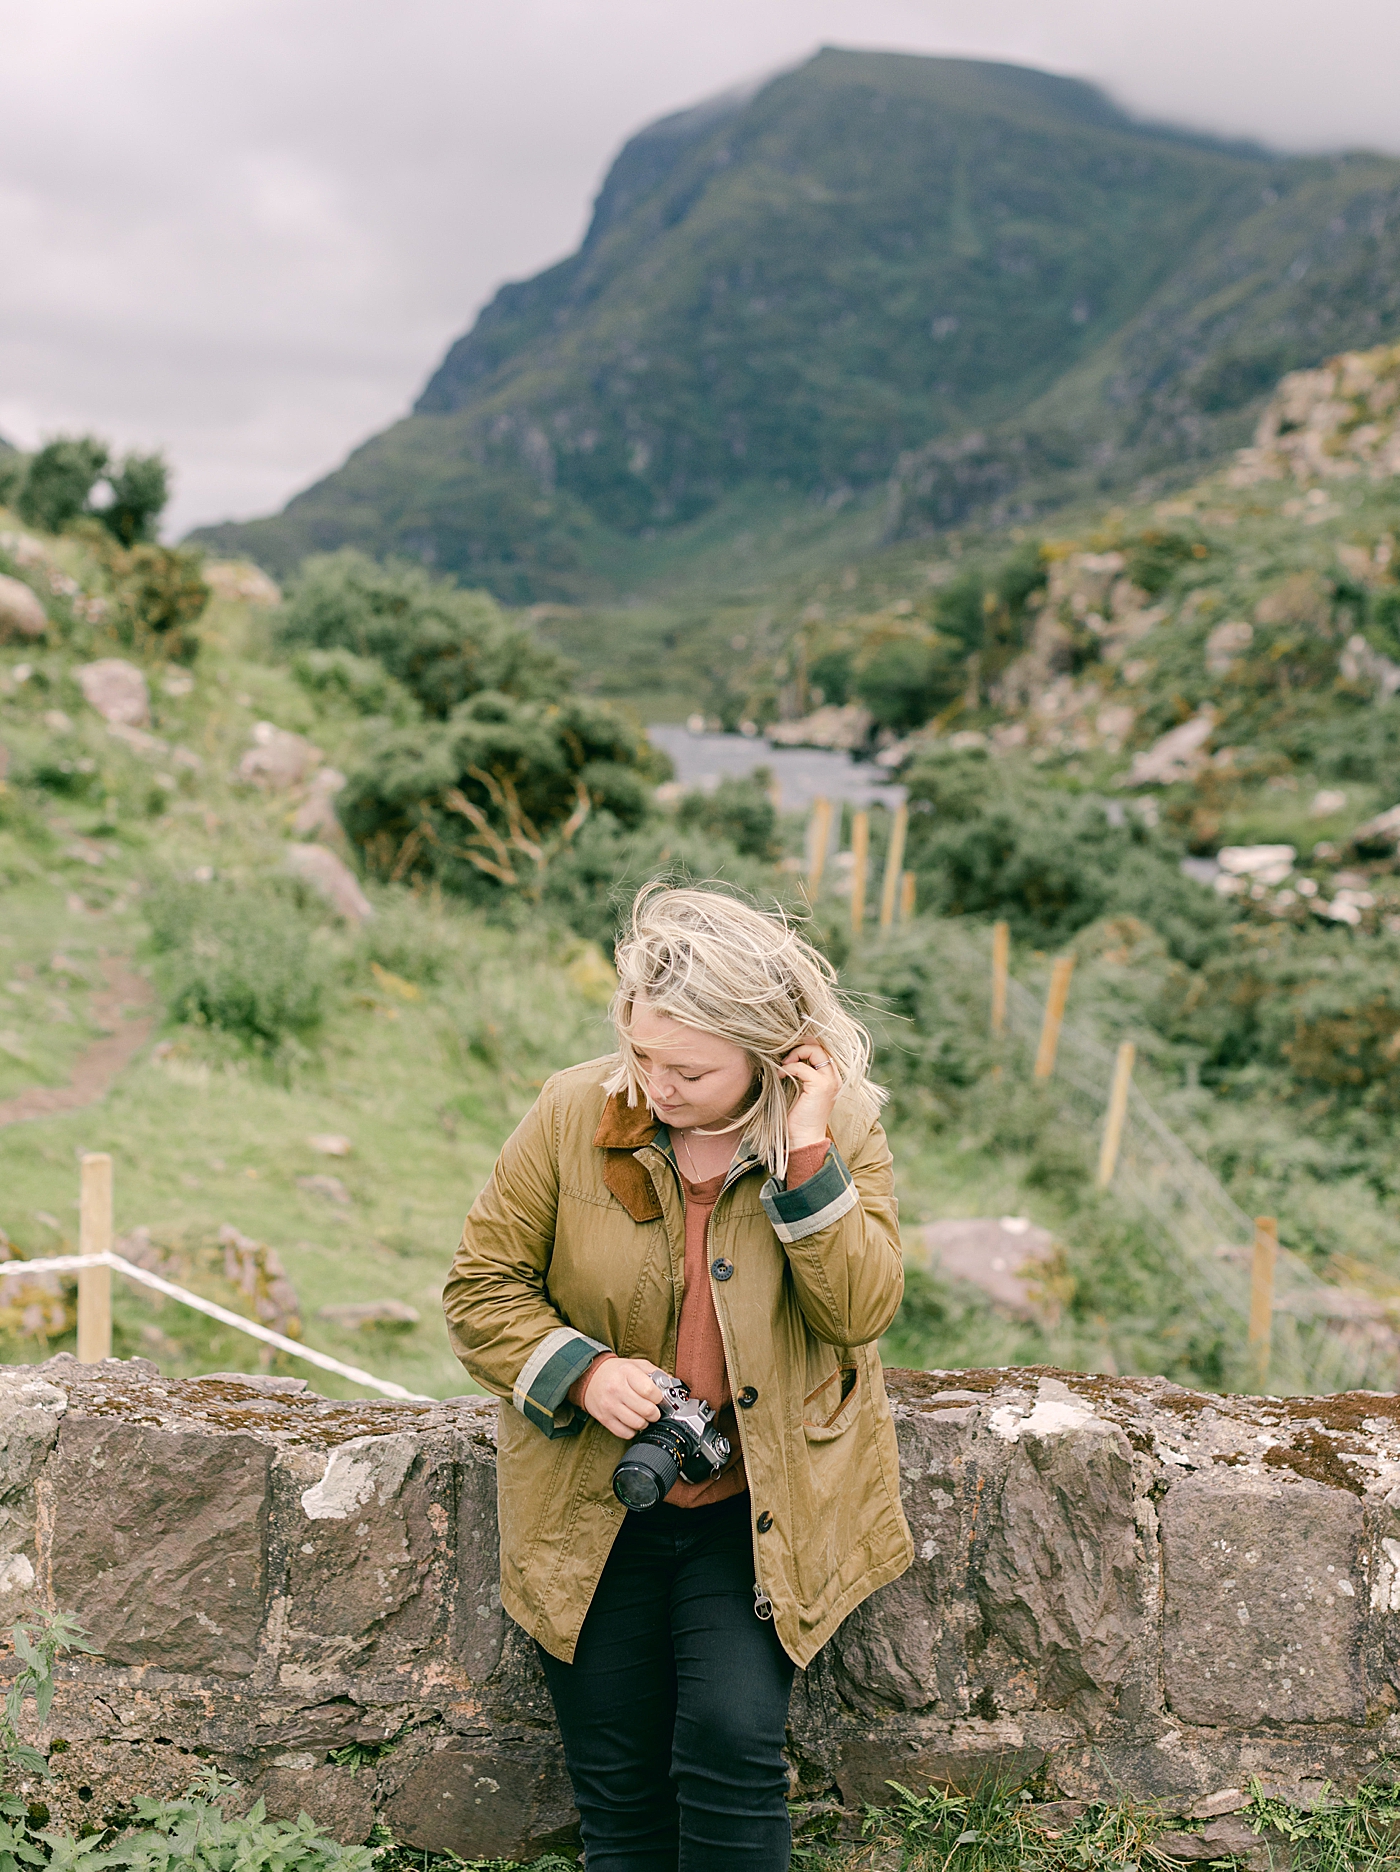 Woman in a brown jacket holding a camera | Photo by Destination Wedding Photographer Hope Helmuth